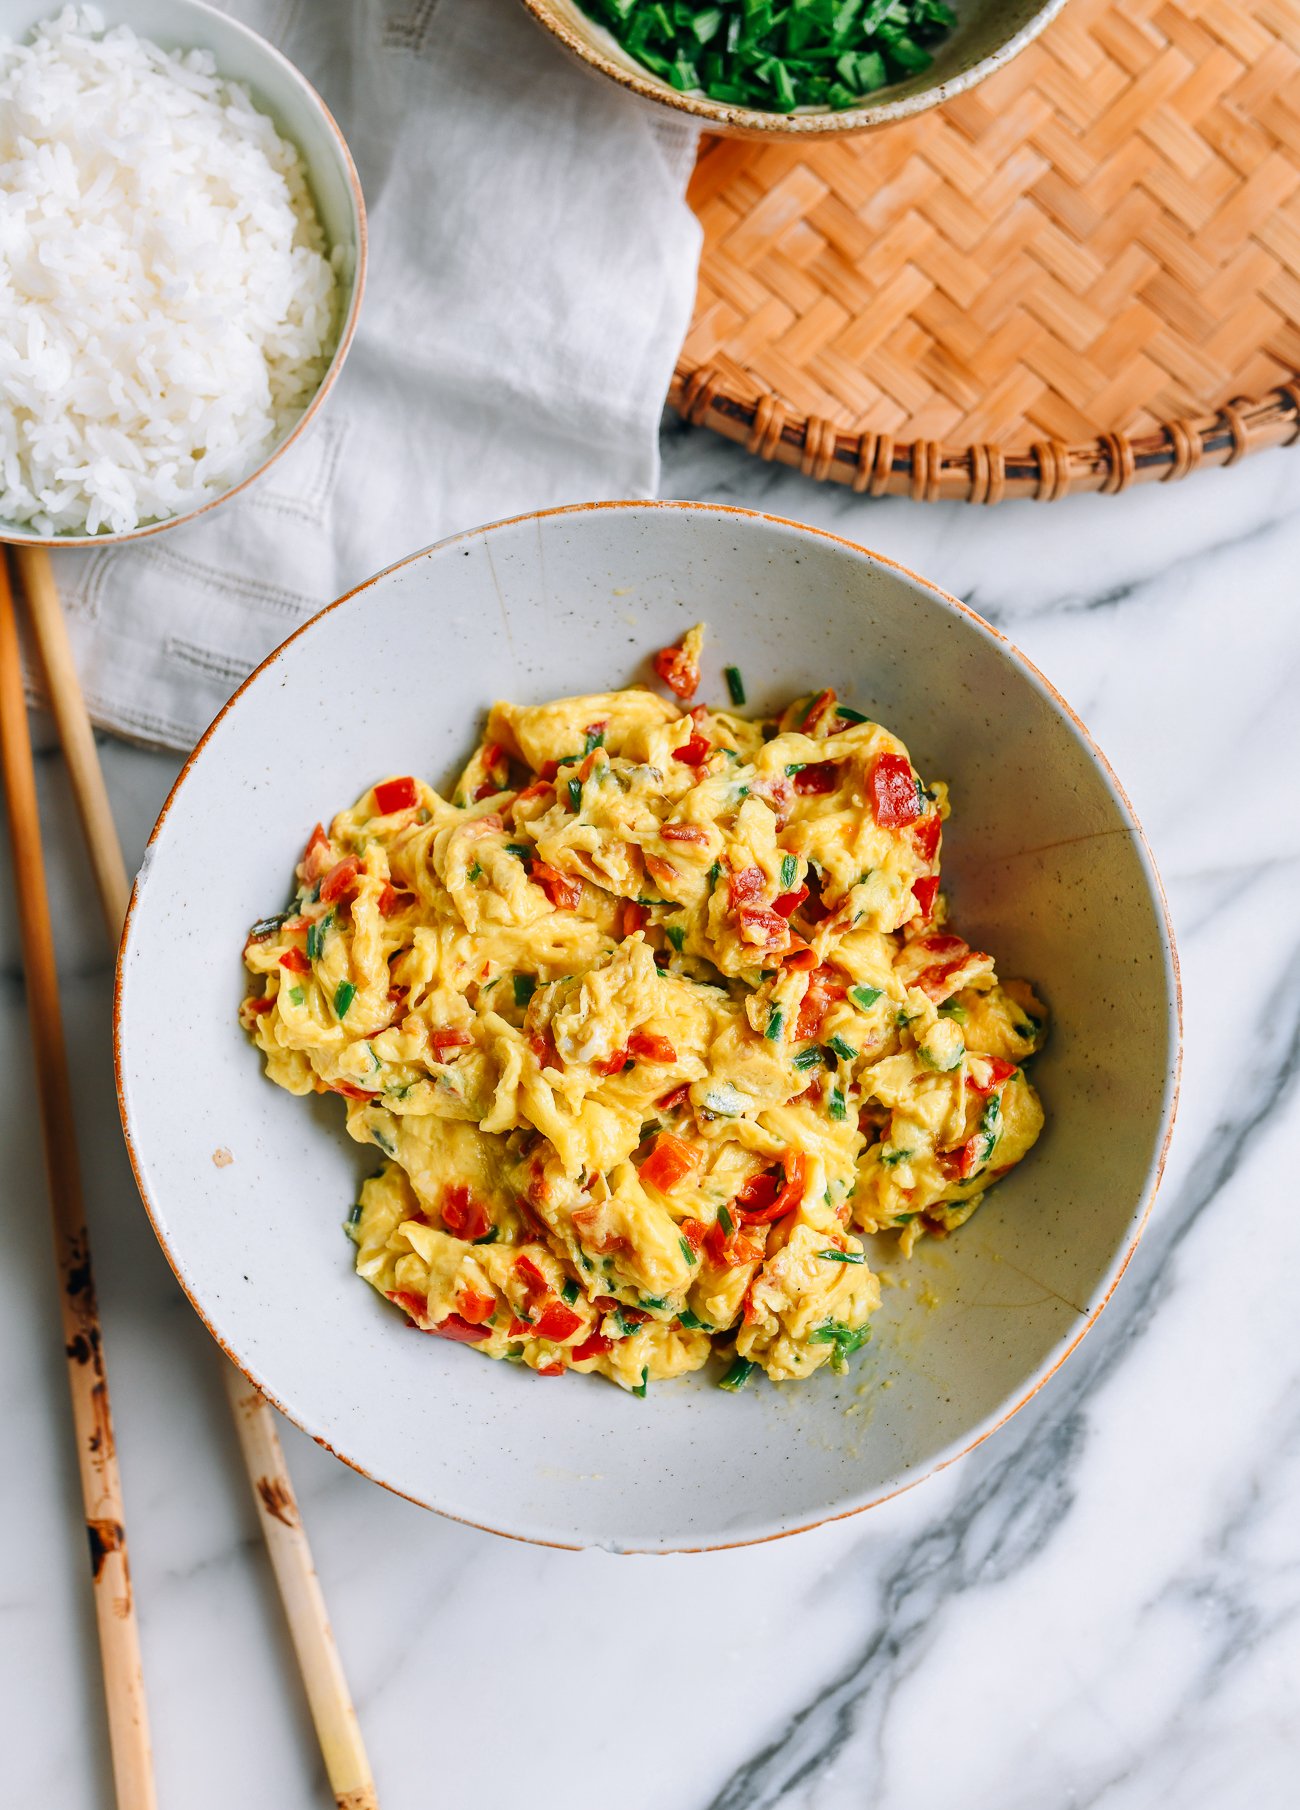 Fluffy Chinese Scrambled Eggs with Garlic Chives and Hunan Salted Chilies